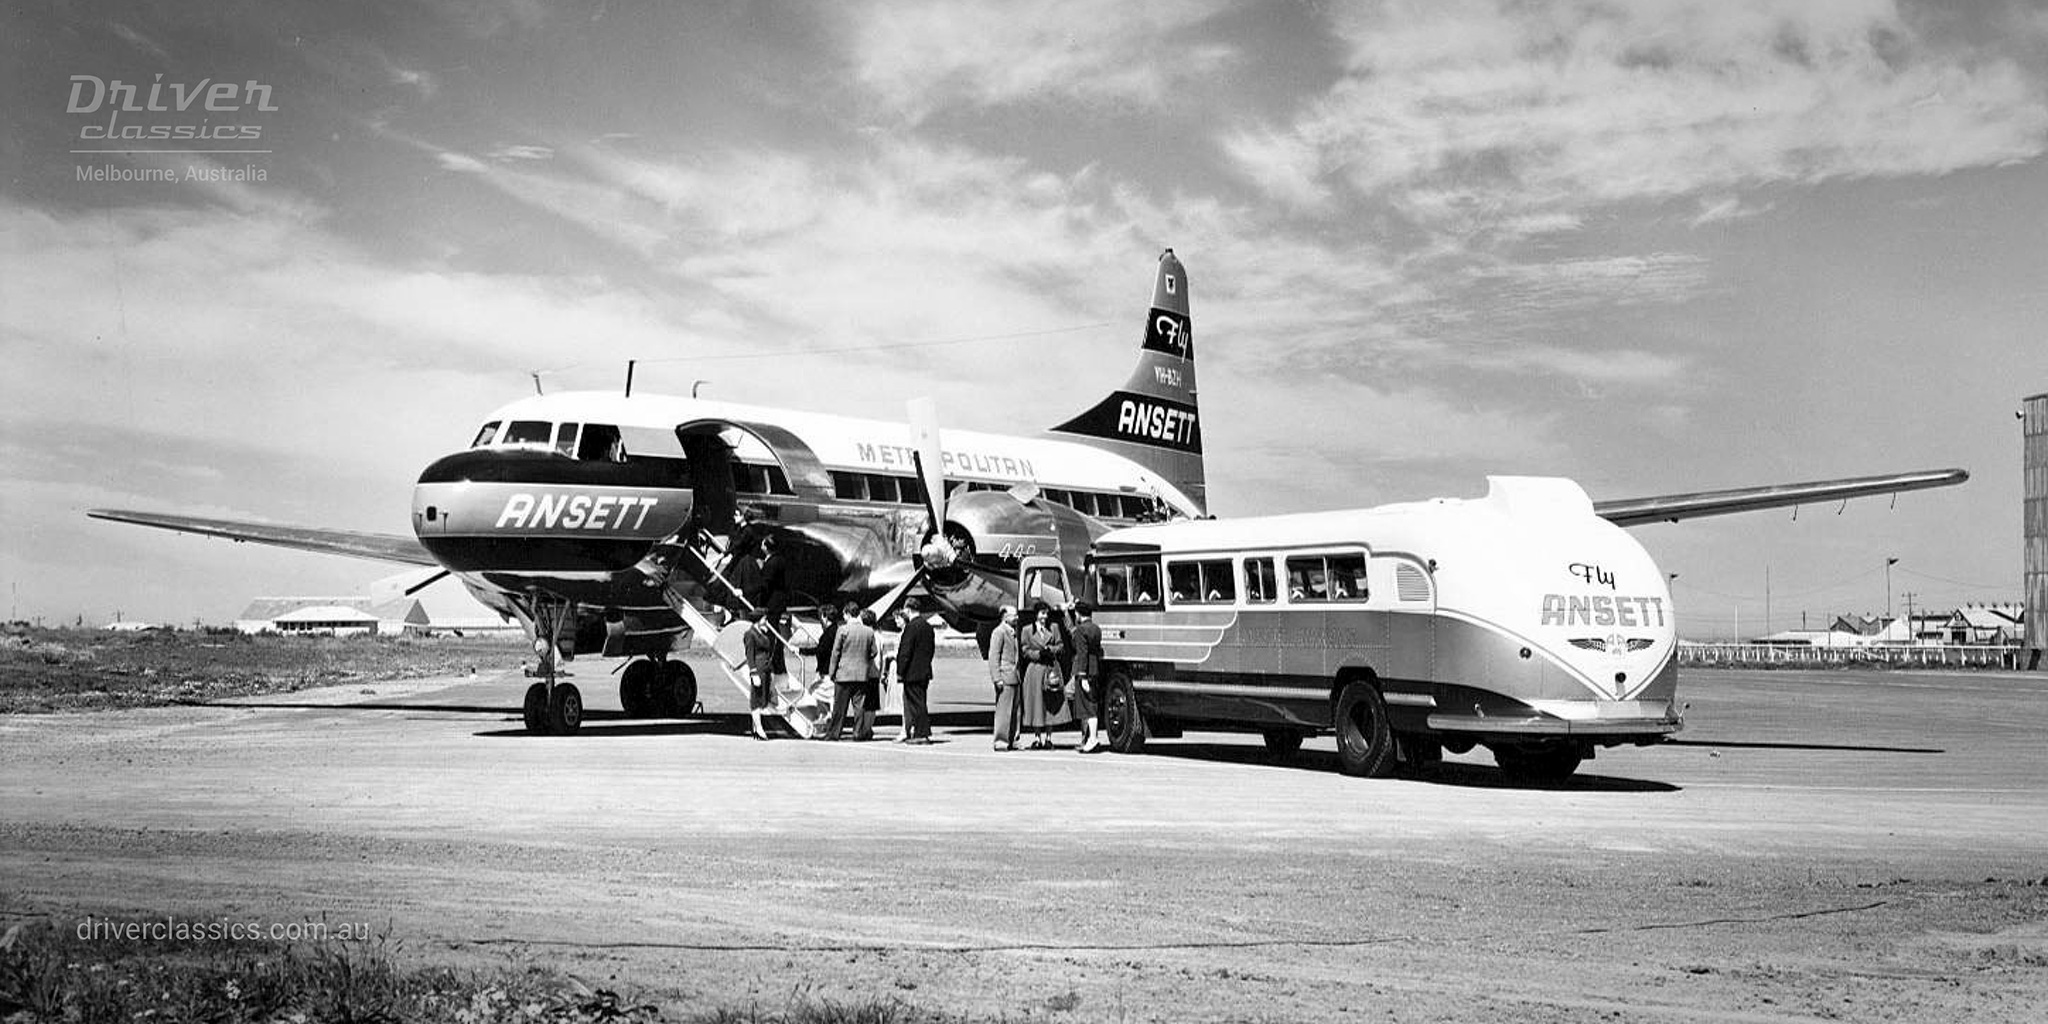 Ansair Flxible Clipper bus with a Convair 440 plane, on the tarmac at Essendon Airport Melbourne VIC. Photo taken in 1957 by Bruce Robinson